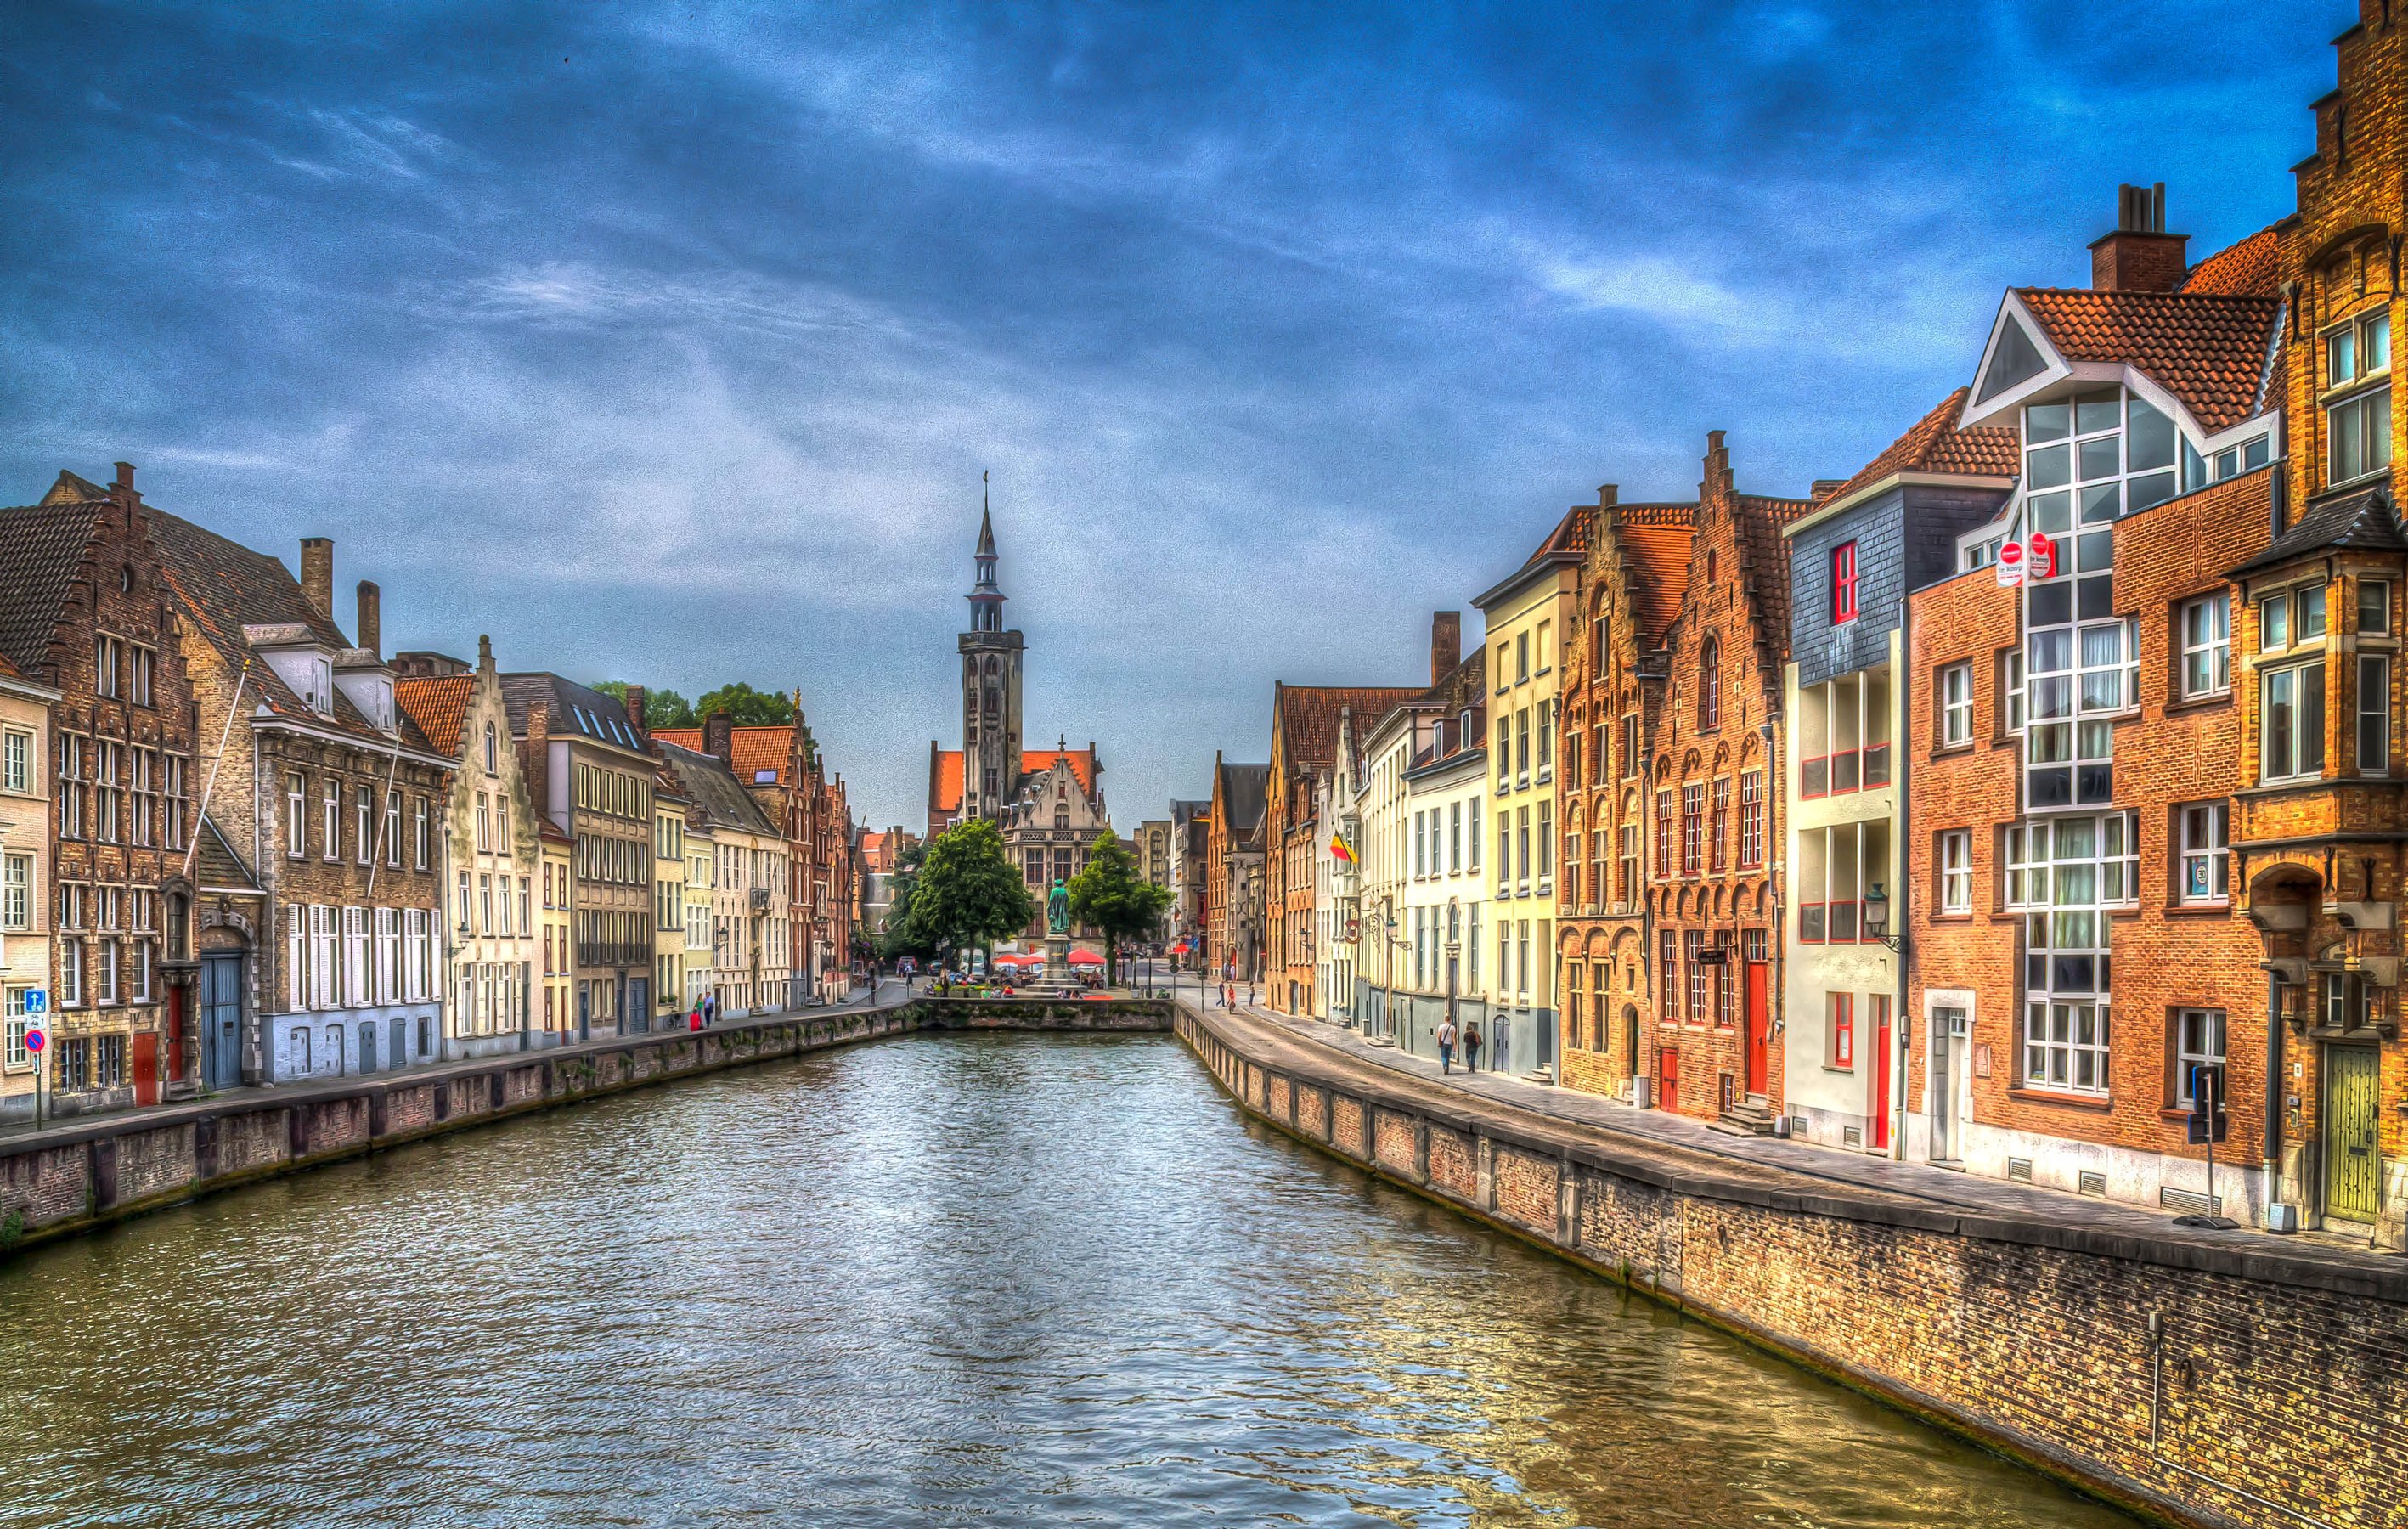 elgium, Houses, Canal, Street, Hdr, Bruges, Cities Wallpaper